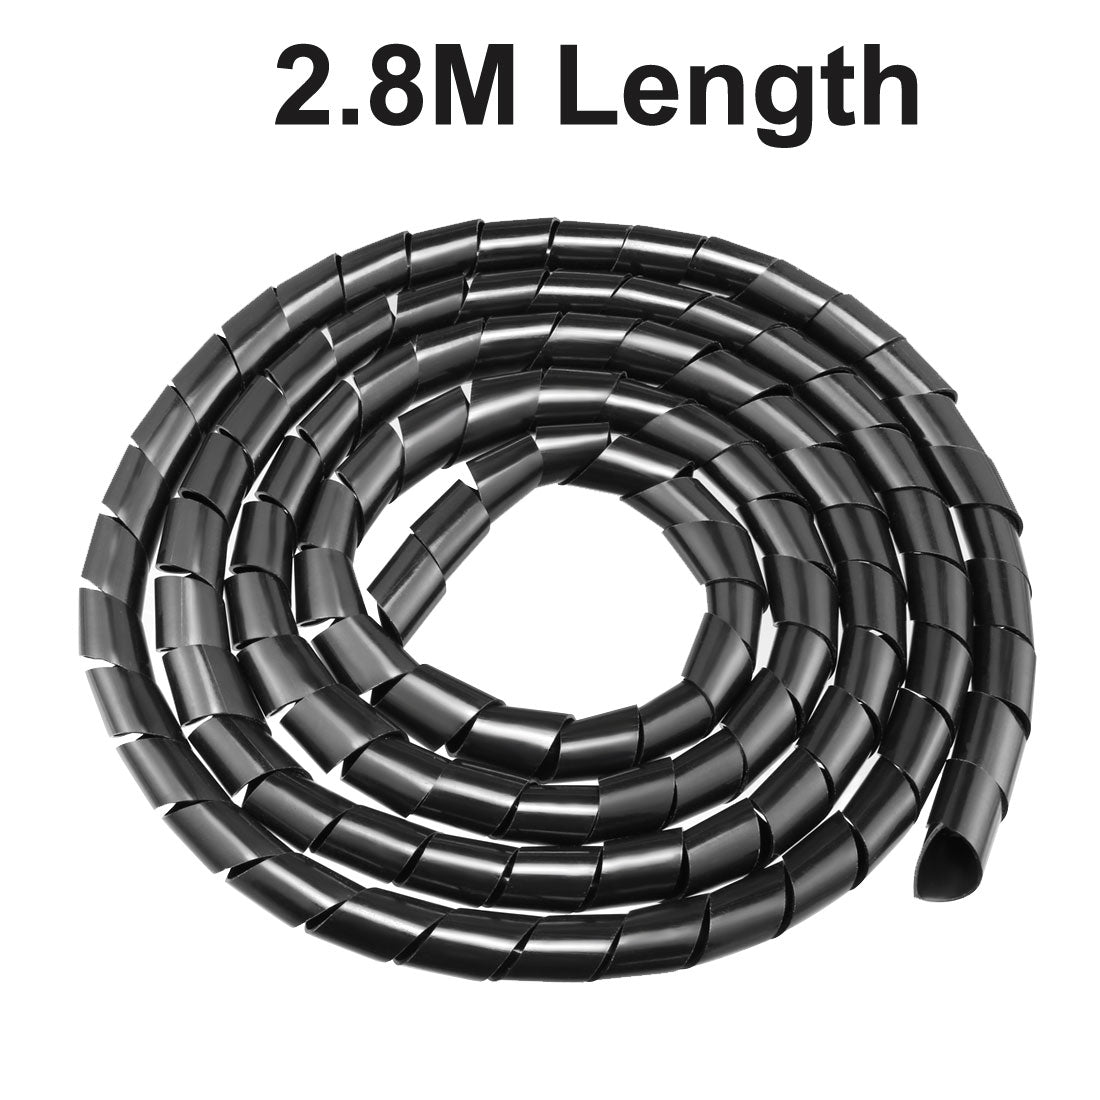 uxcell Uxcell 20mm Flexible Spiral Tube Cable Wire Wrap Computer Manage Cord Black 2.8M